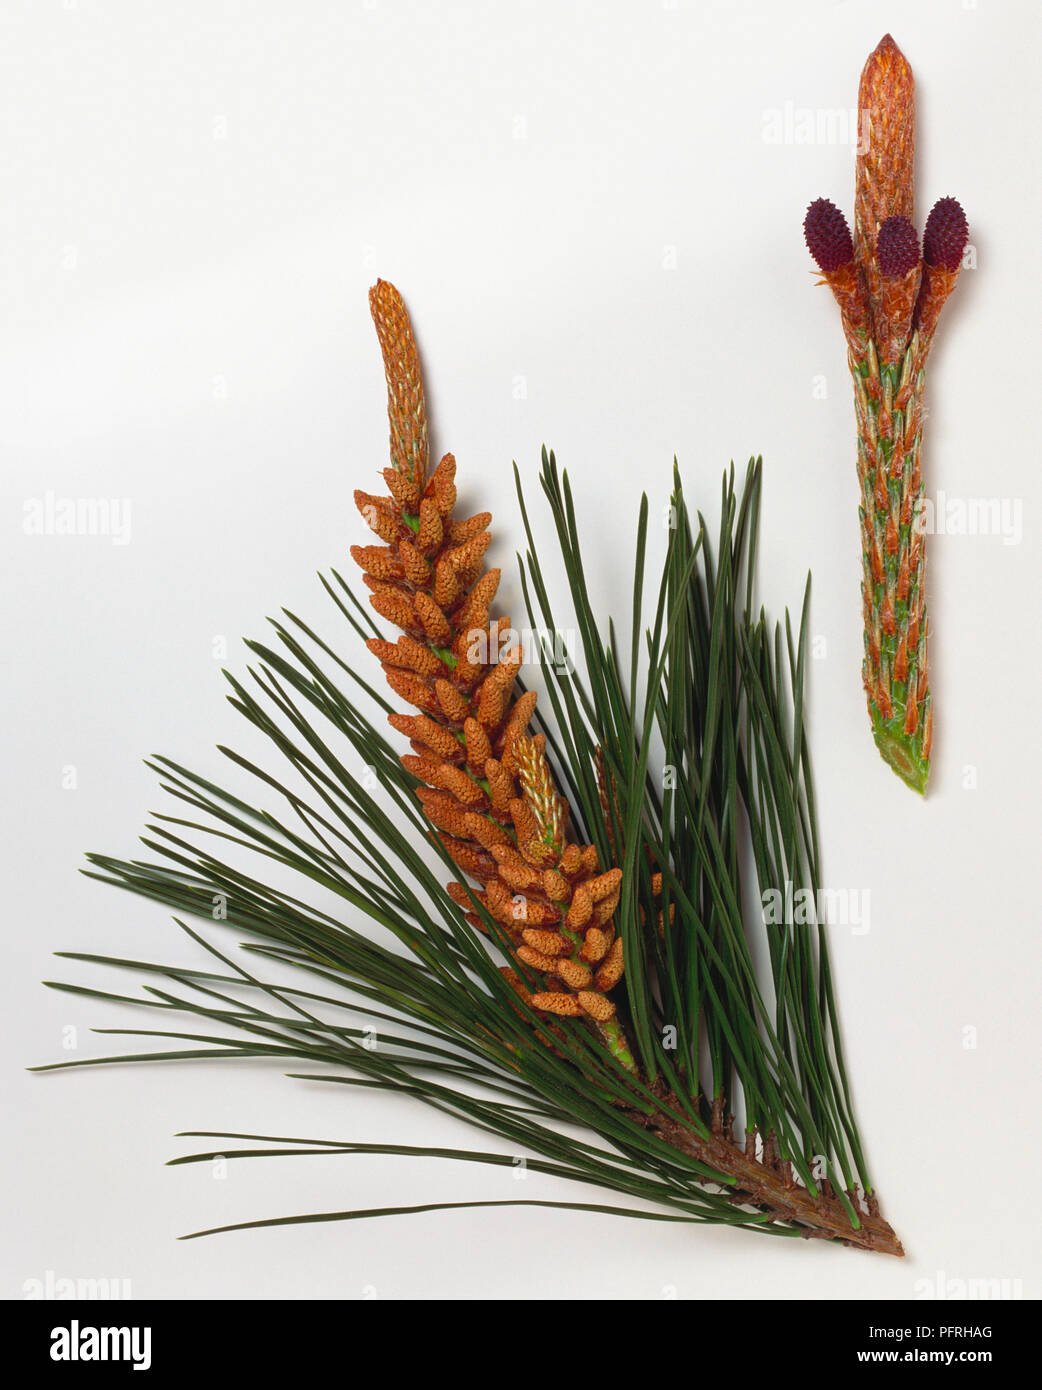 Pinus radiata (Monterey pine), leaves and clustered male flowers, and stem with female flowers Stock Photo